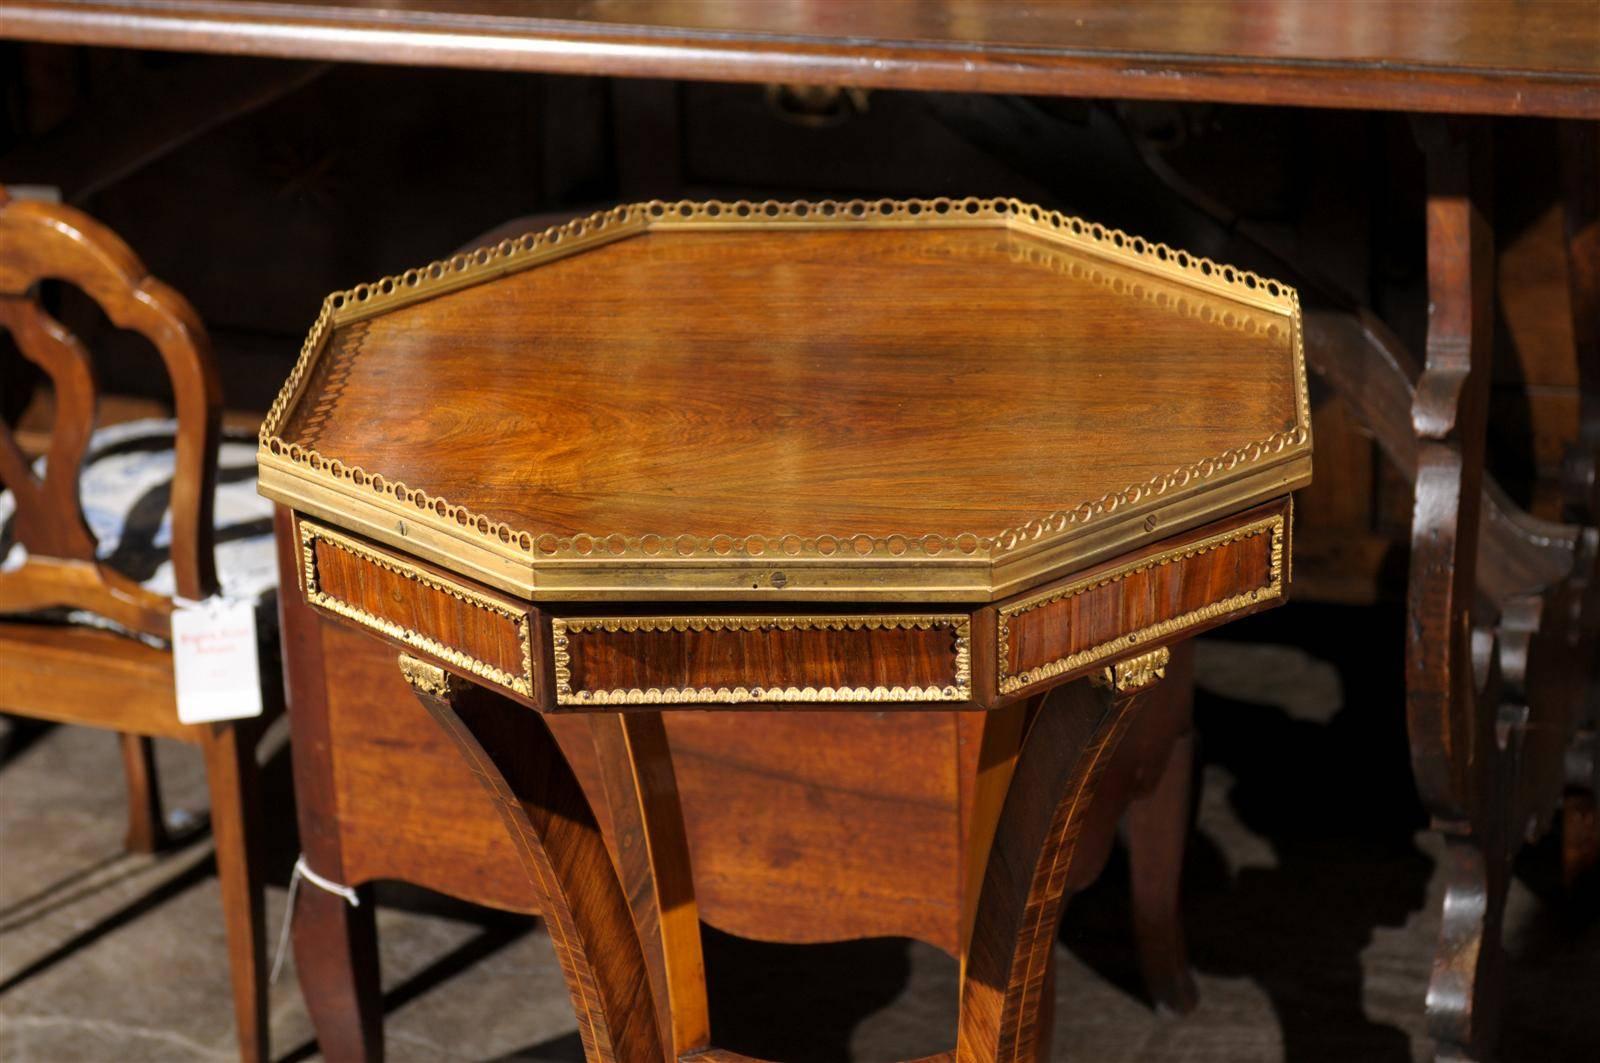 19th Century English Regency Rosewood Veneered Octagonal Side Table from the 1820s